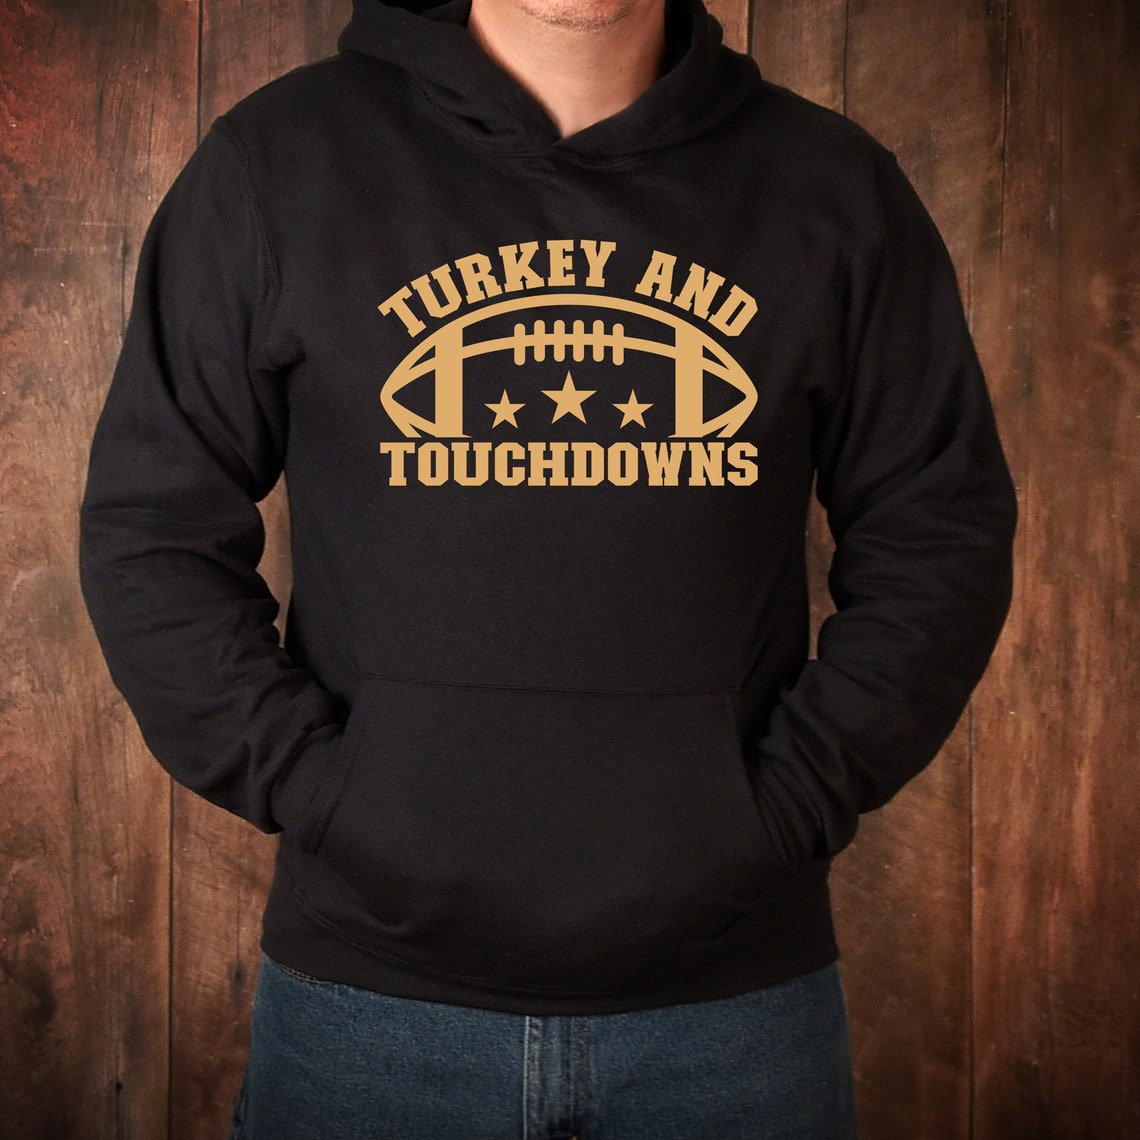 Turkey and Touchdowns Svg Png Eps Pdf Files Turkey and - Etsy